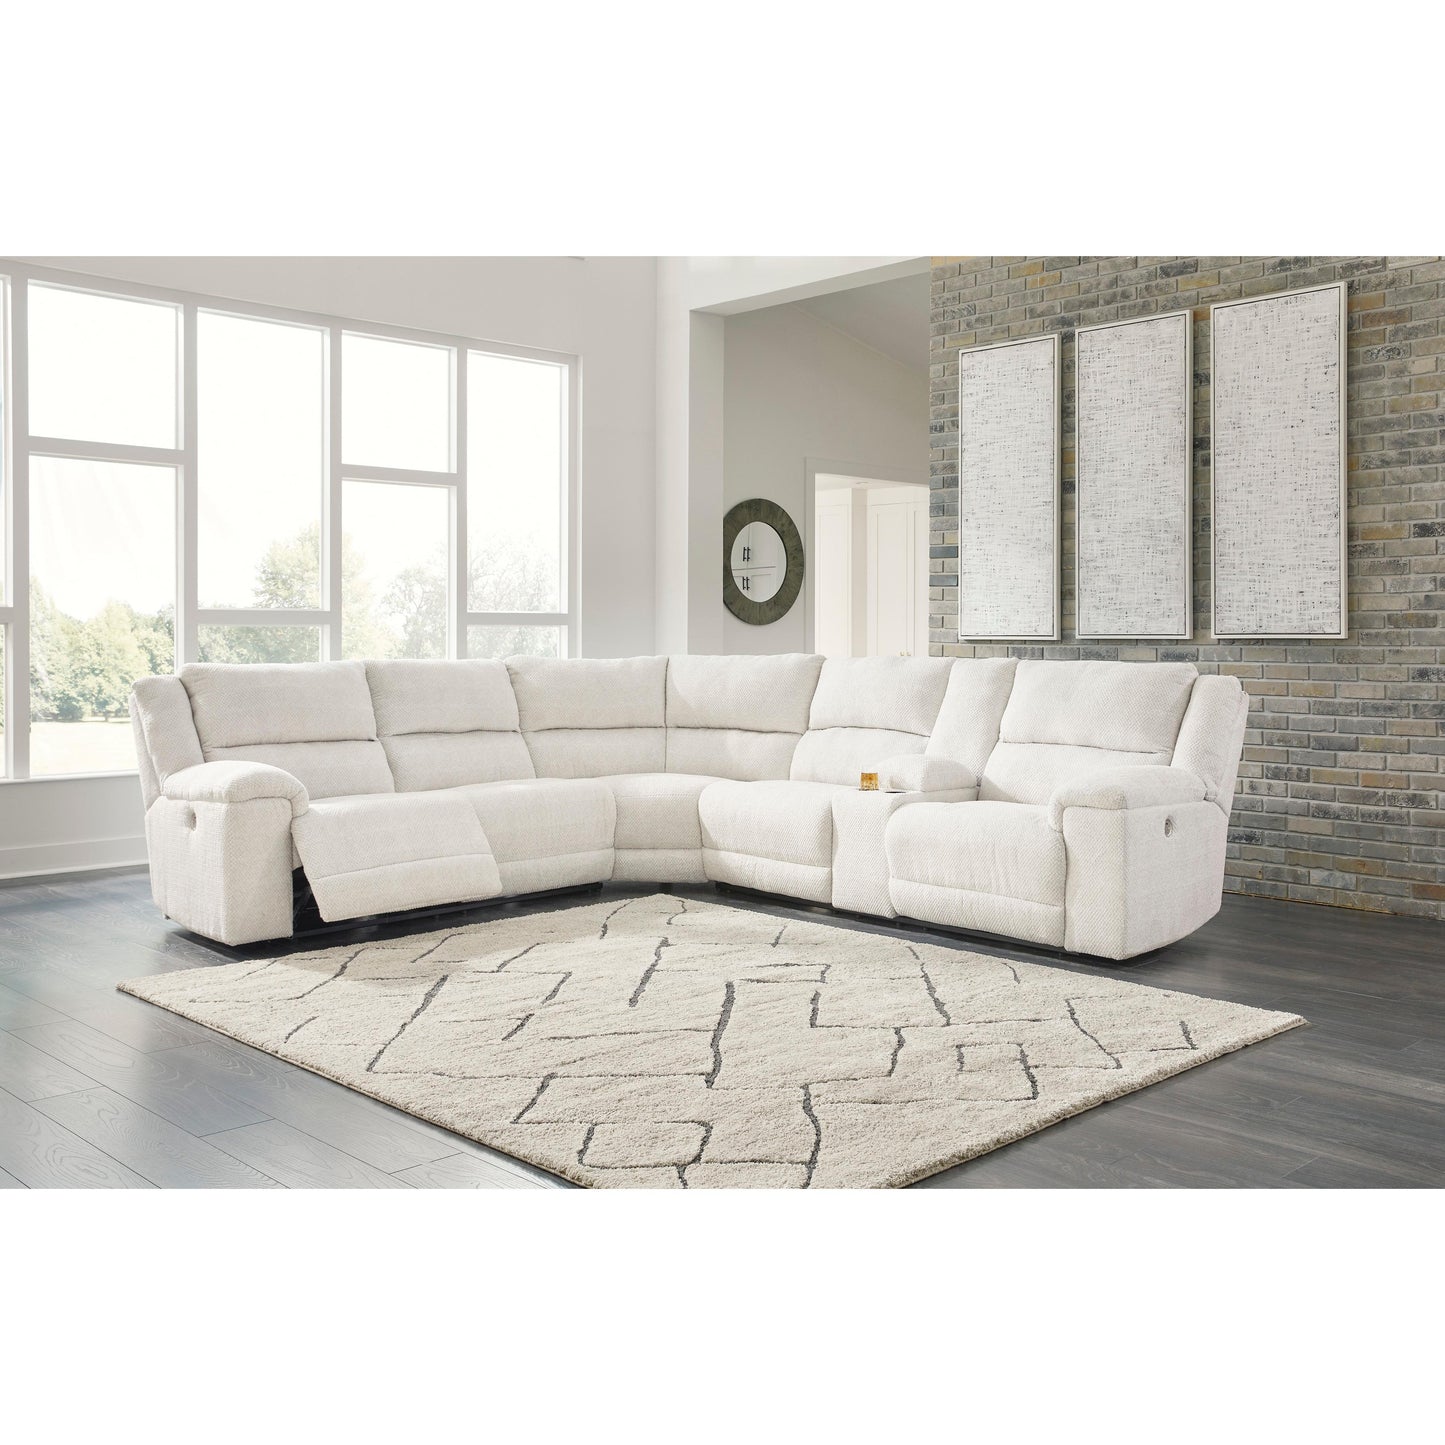 Signature Design by Ashley Keensburg Power Reclining Fabric 3 pc Sectional 6180763/6180777/6180790 IMAGE 3